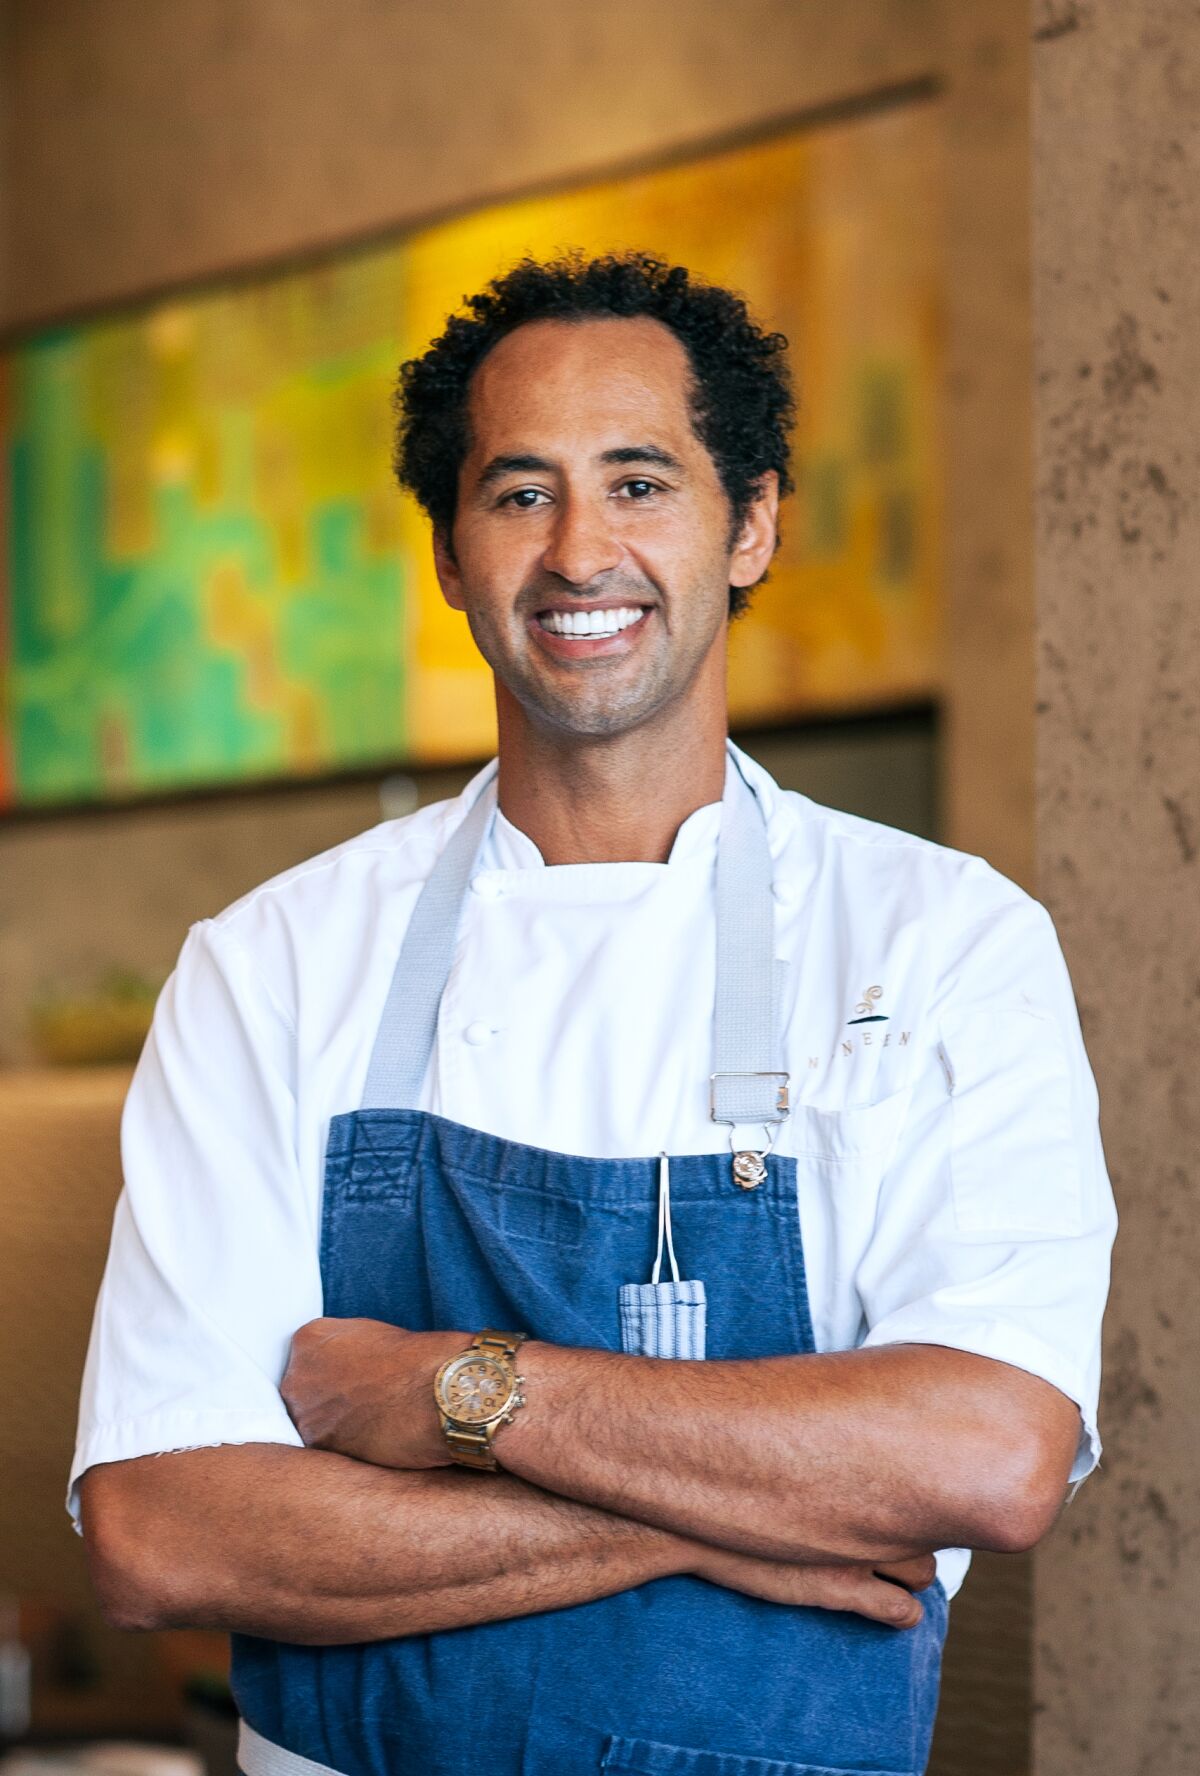 Jason Knibb, executive chef at Nine-Ten in La Jolla, said the invitation to participate in "United We Cook" "provided us with a glimmer of hope.”